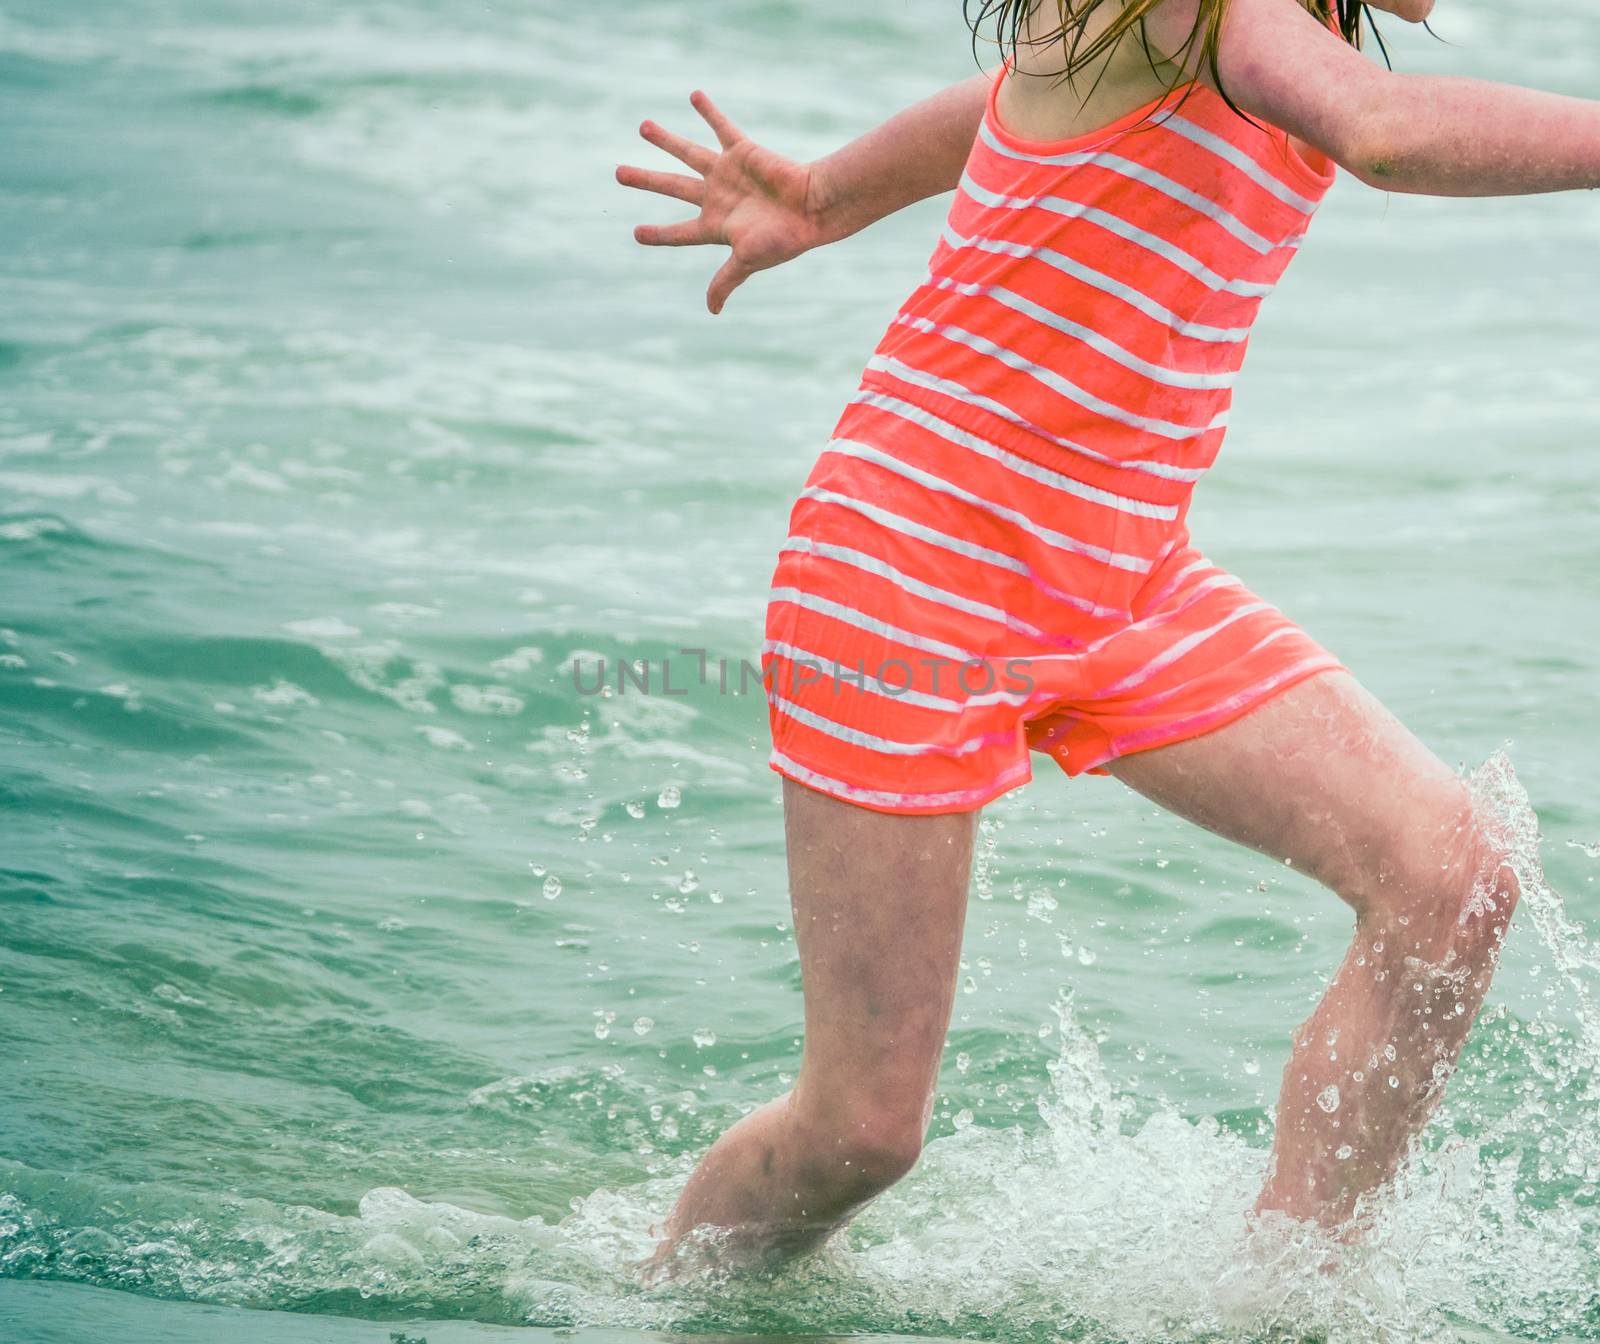 Retro Style Detail Of A Child In Old Fashioned Swimsuit Playing In The Ocean Waves